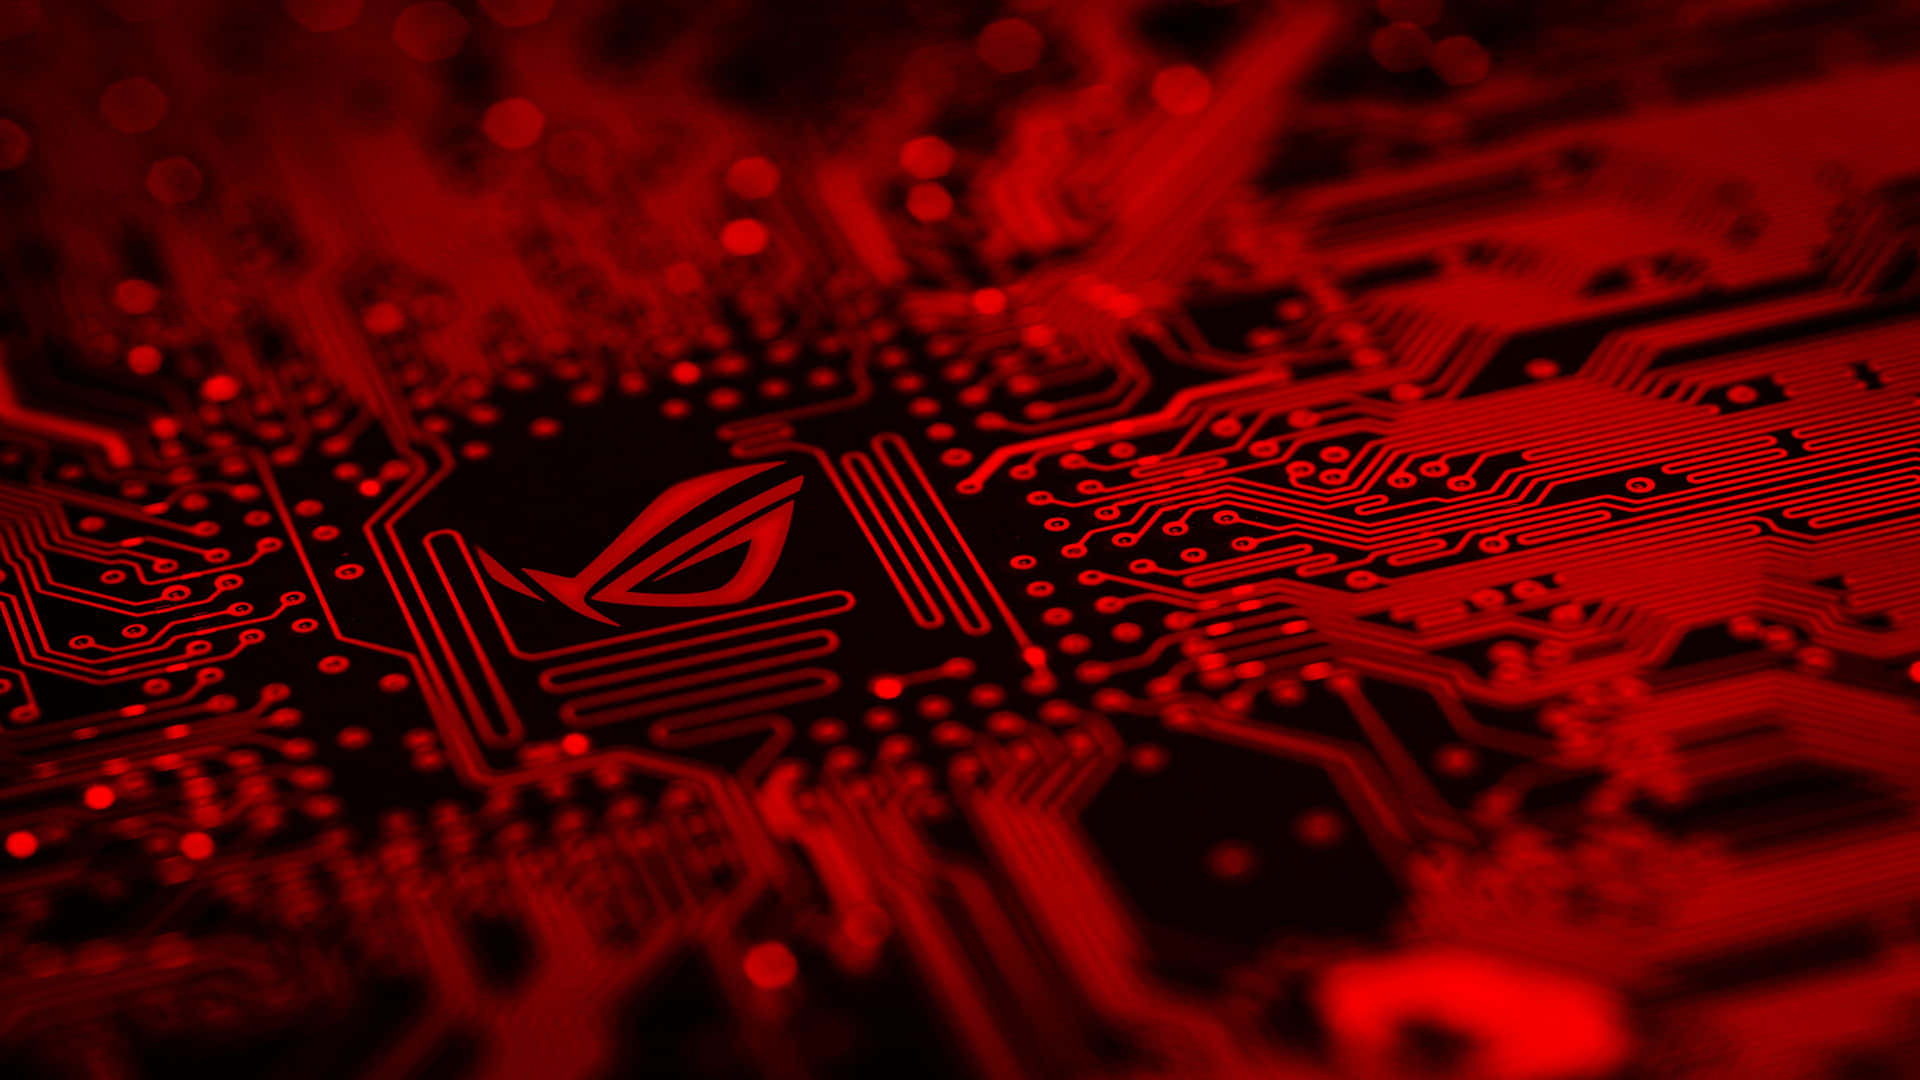 Gear up for better gaming performance with the ASUS ROG